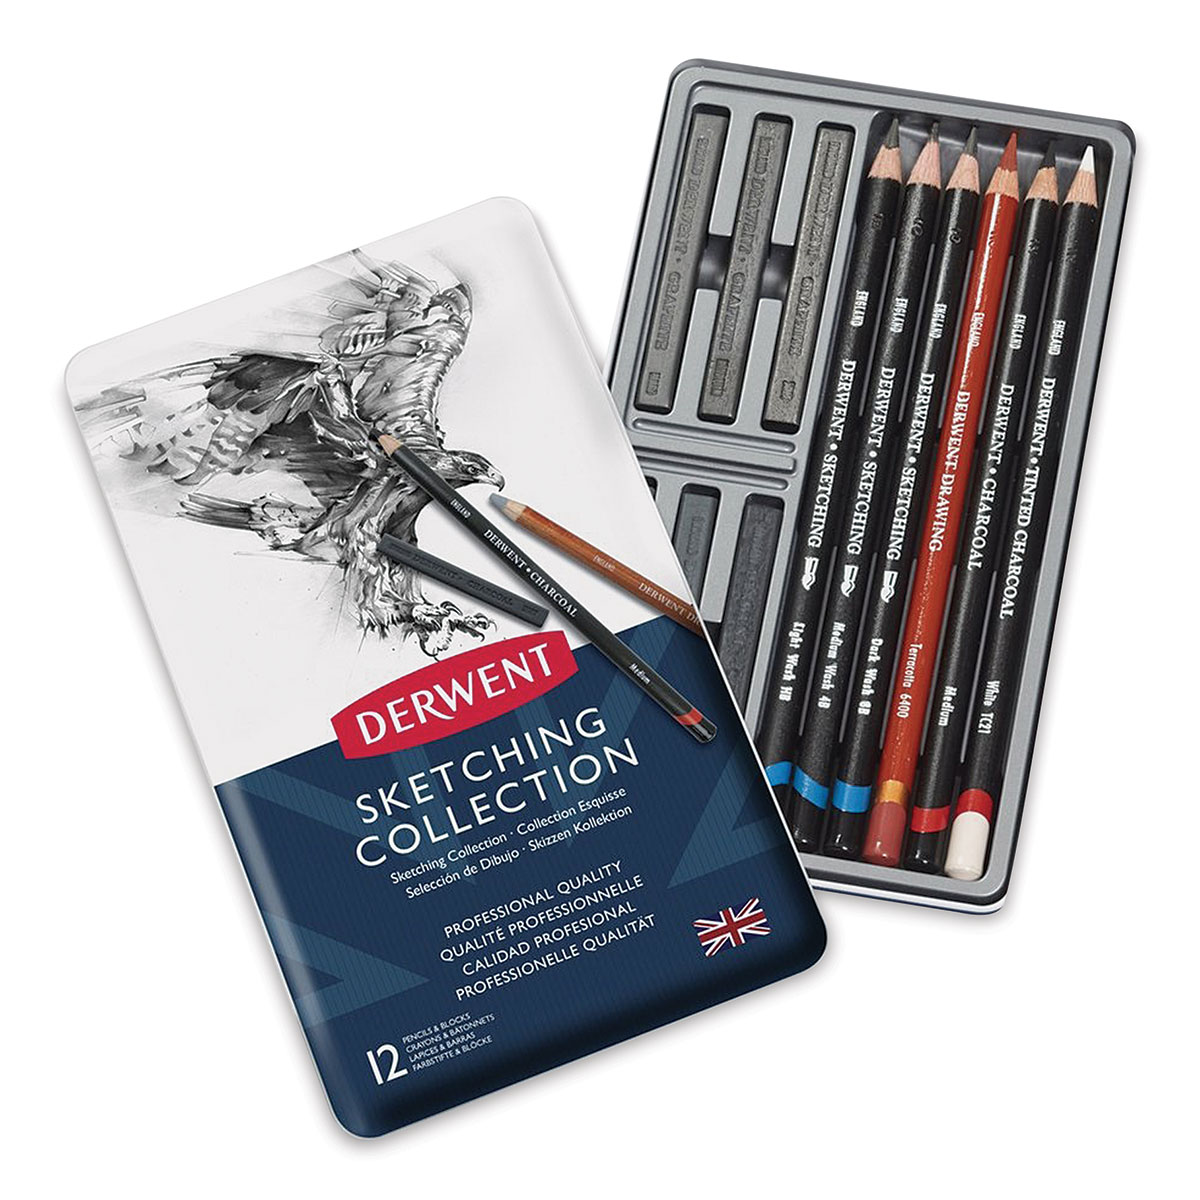 Derwent Sketching Collection - 38 Mixed Drawing Materials - Sealed